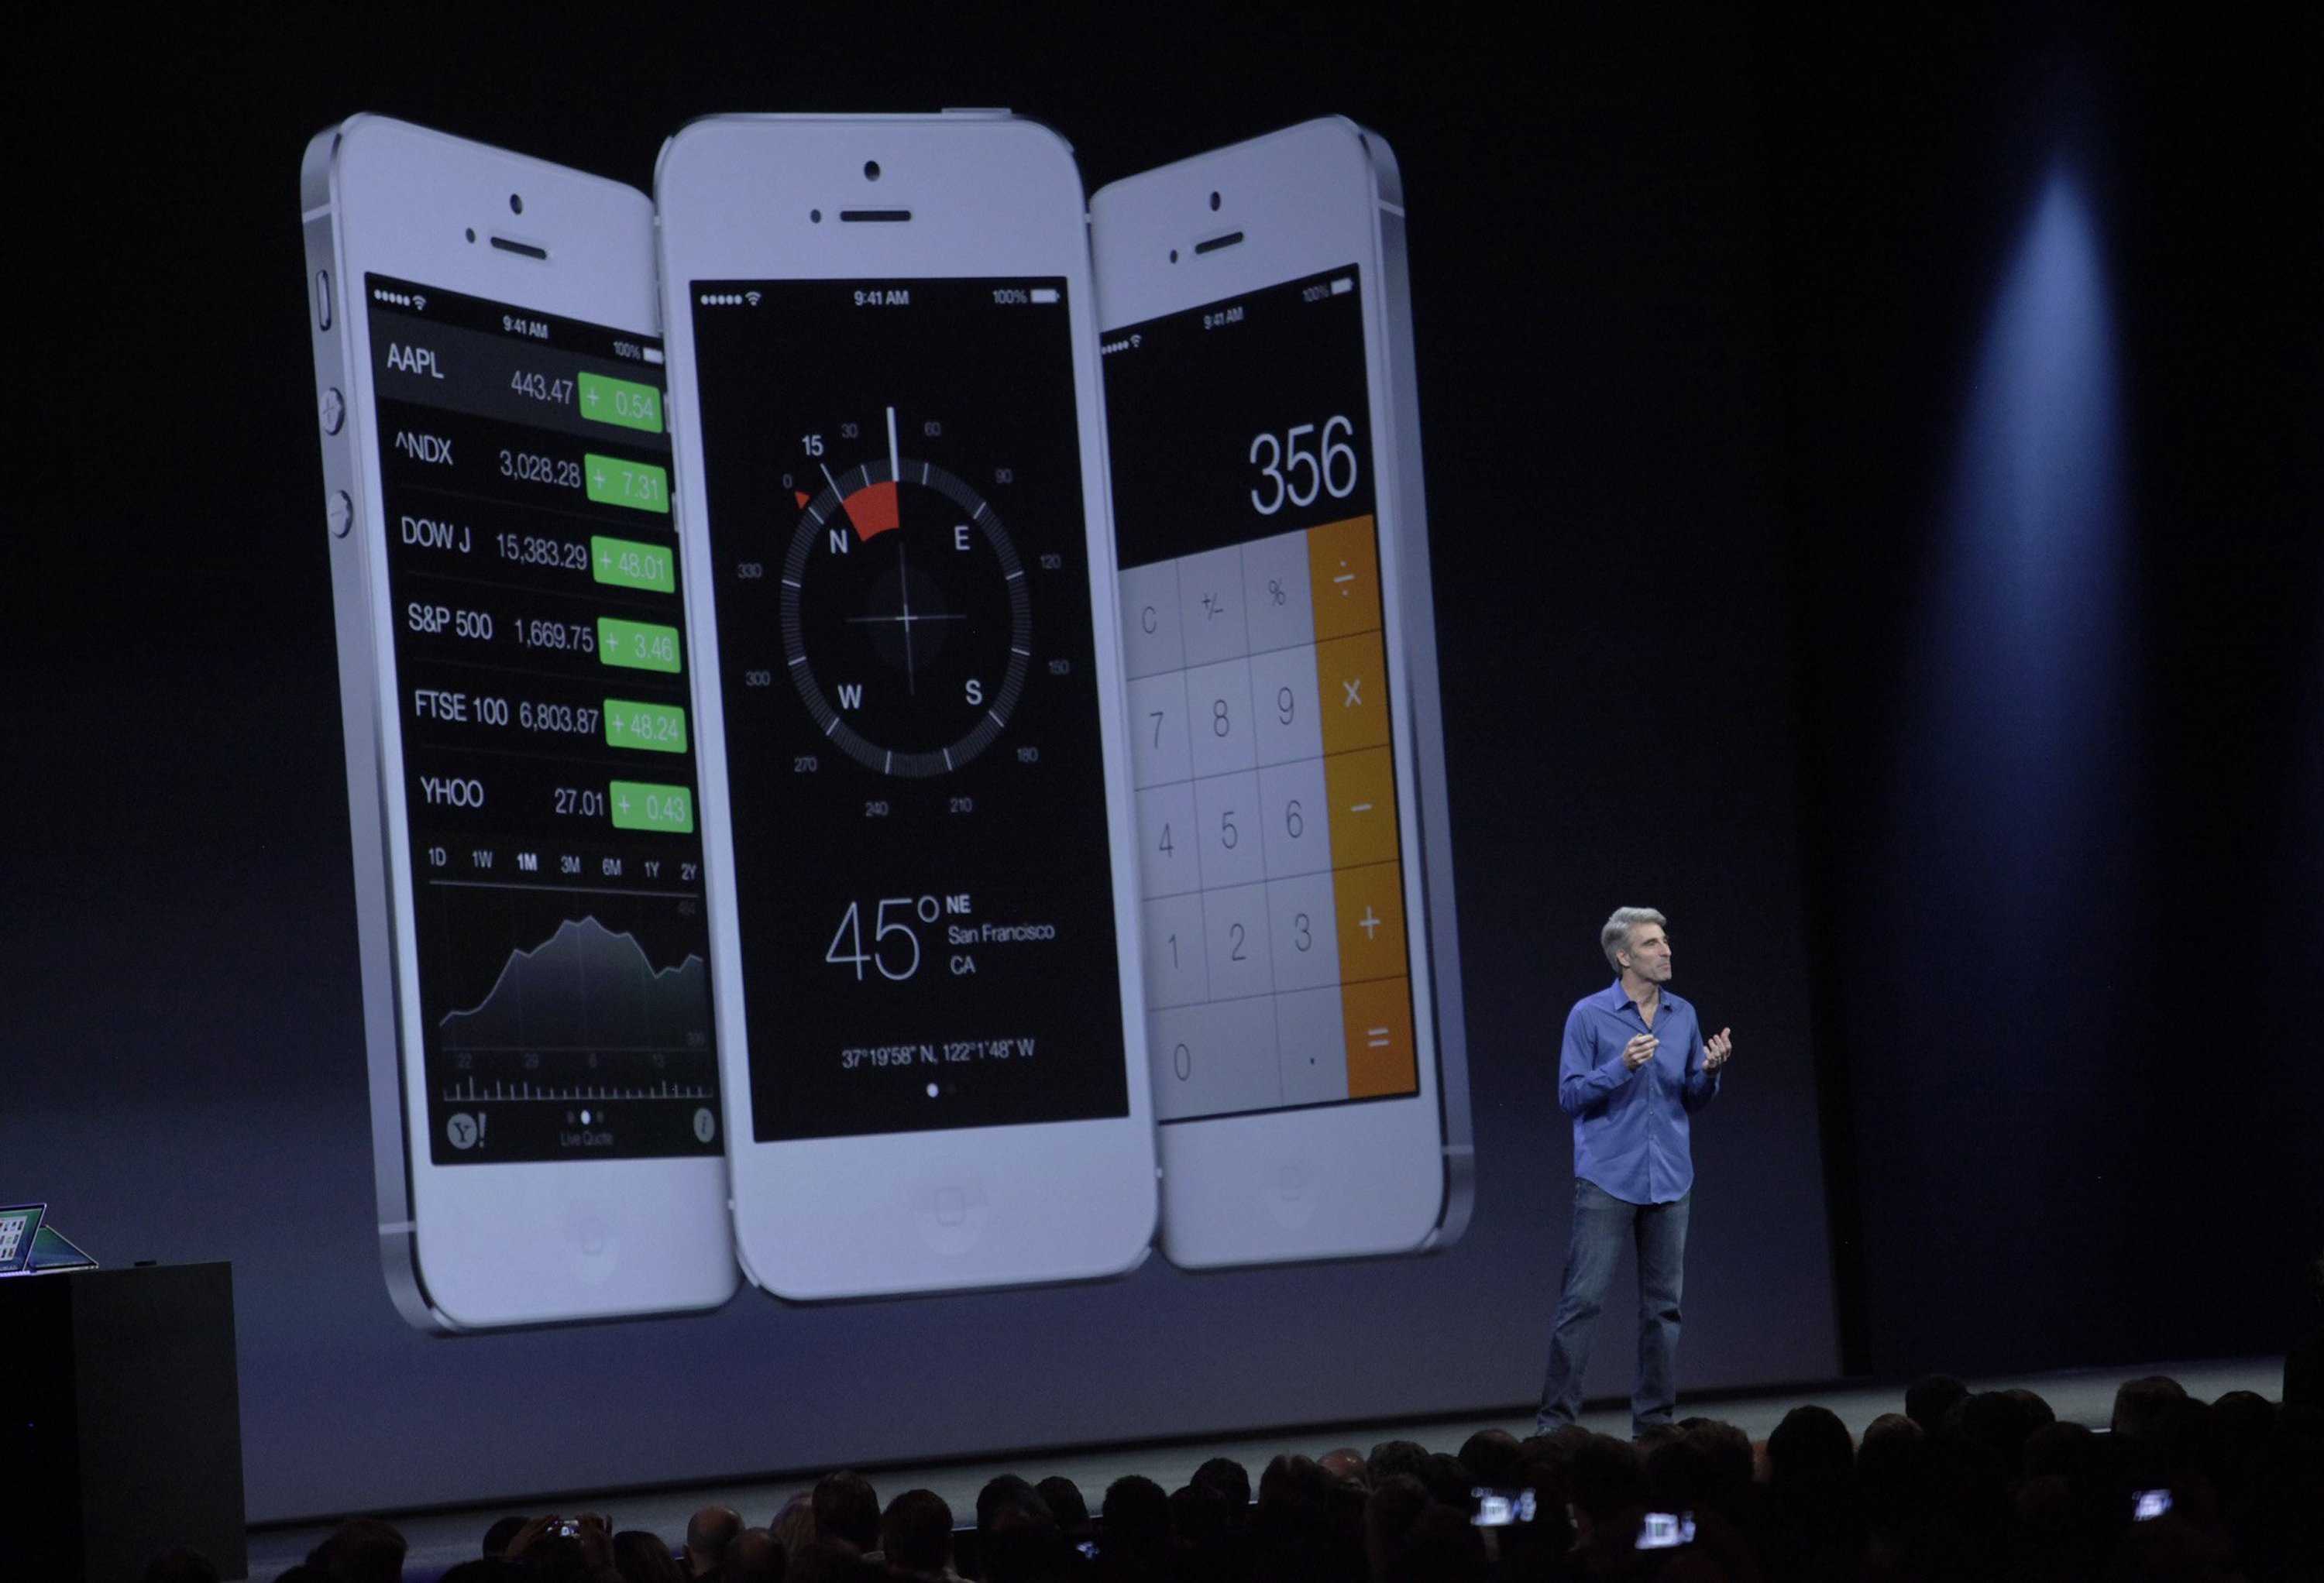 Federighi takes the stage to speak to fans about iOS 7